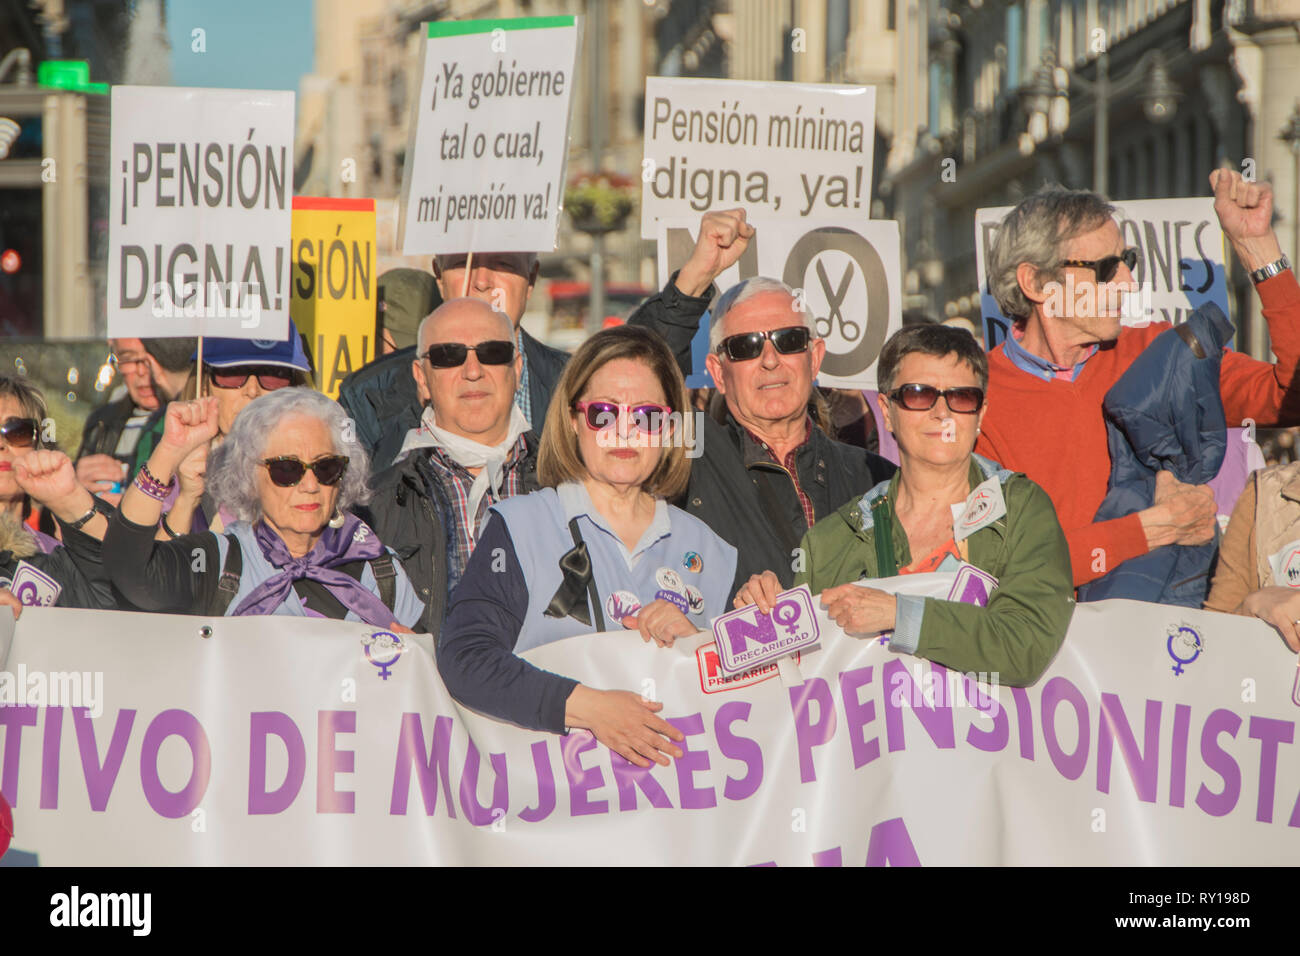 Madrid, Spain. 11th March, 2019. People with placards,¨dignified pension, thief government¨. People from different regions of Madrid demonstrates againts pension cuts in Spain Credit: Alberto Sibaja Ramírez/Alamy Live News Stock Photo